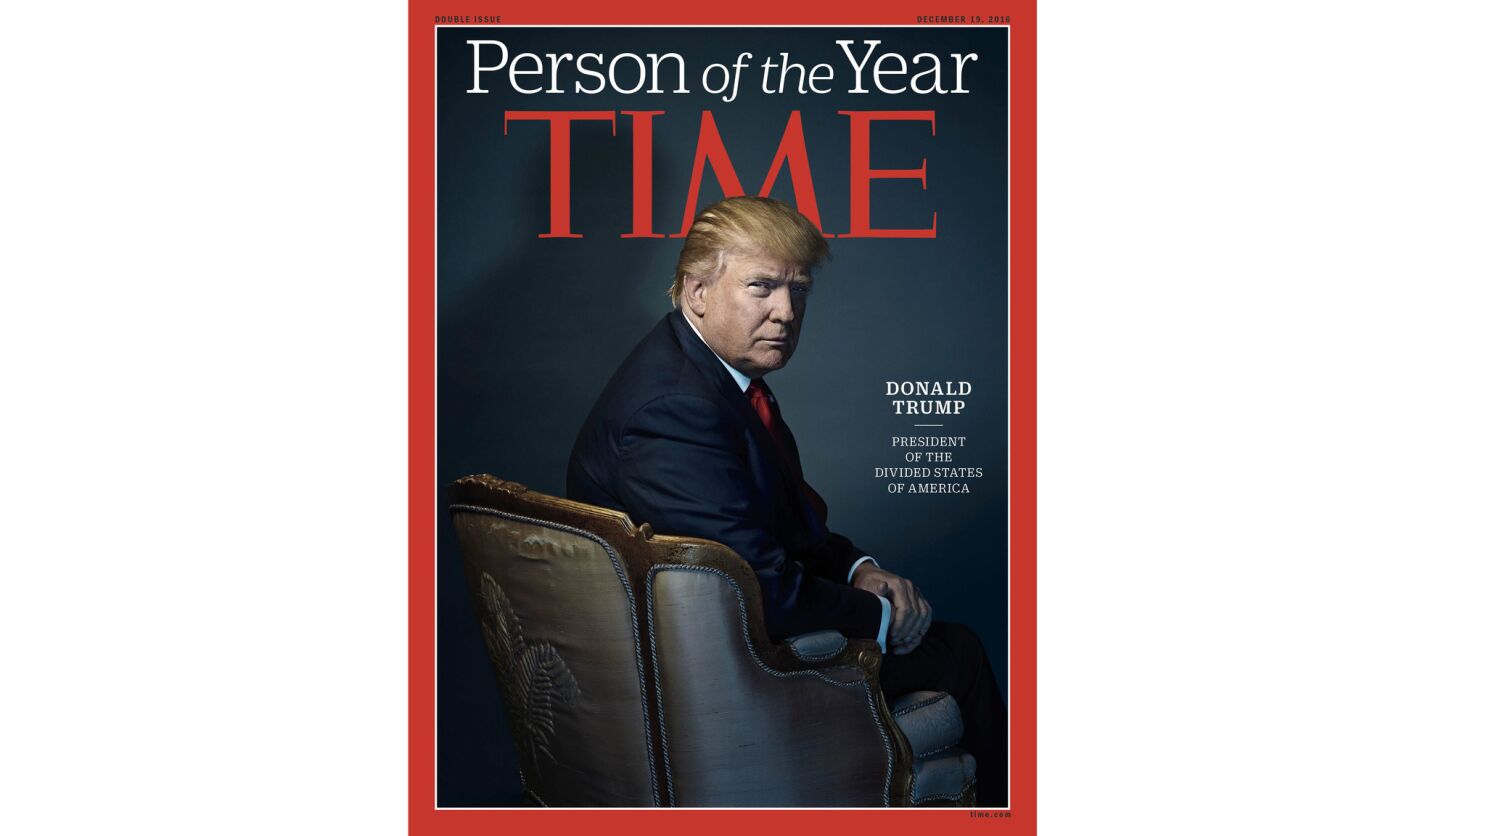 Trump is named Time magazine's Person of the Year - Los Angeles